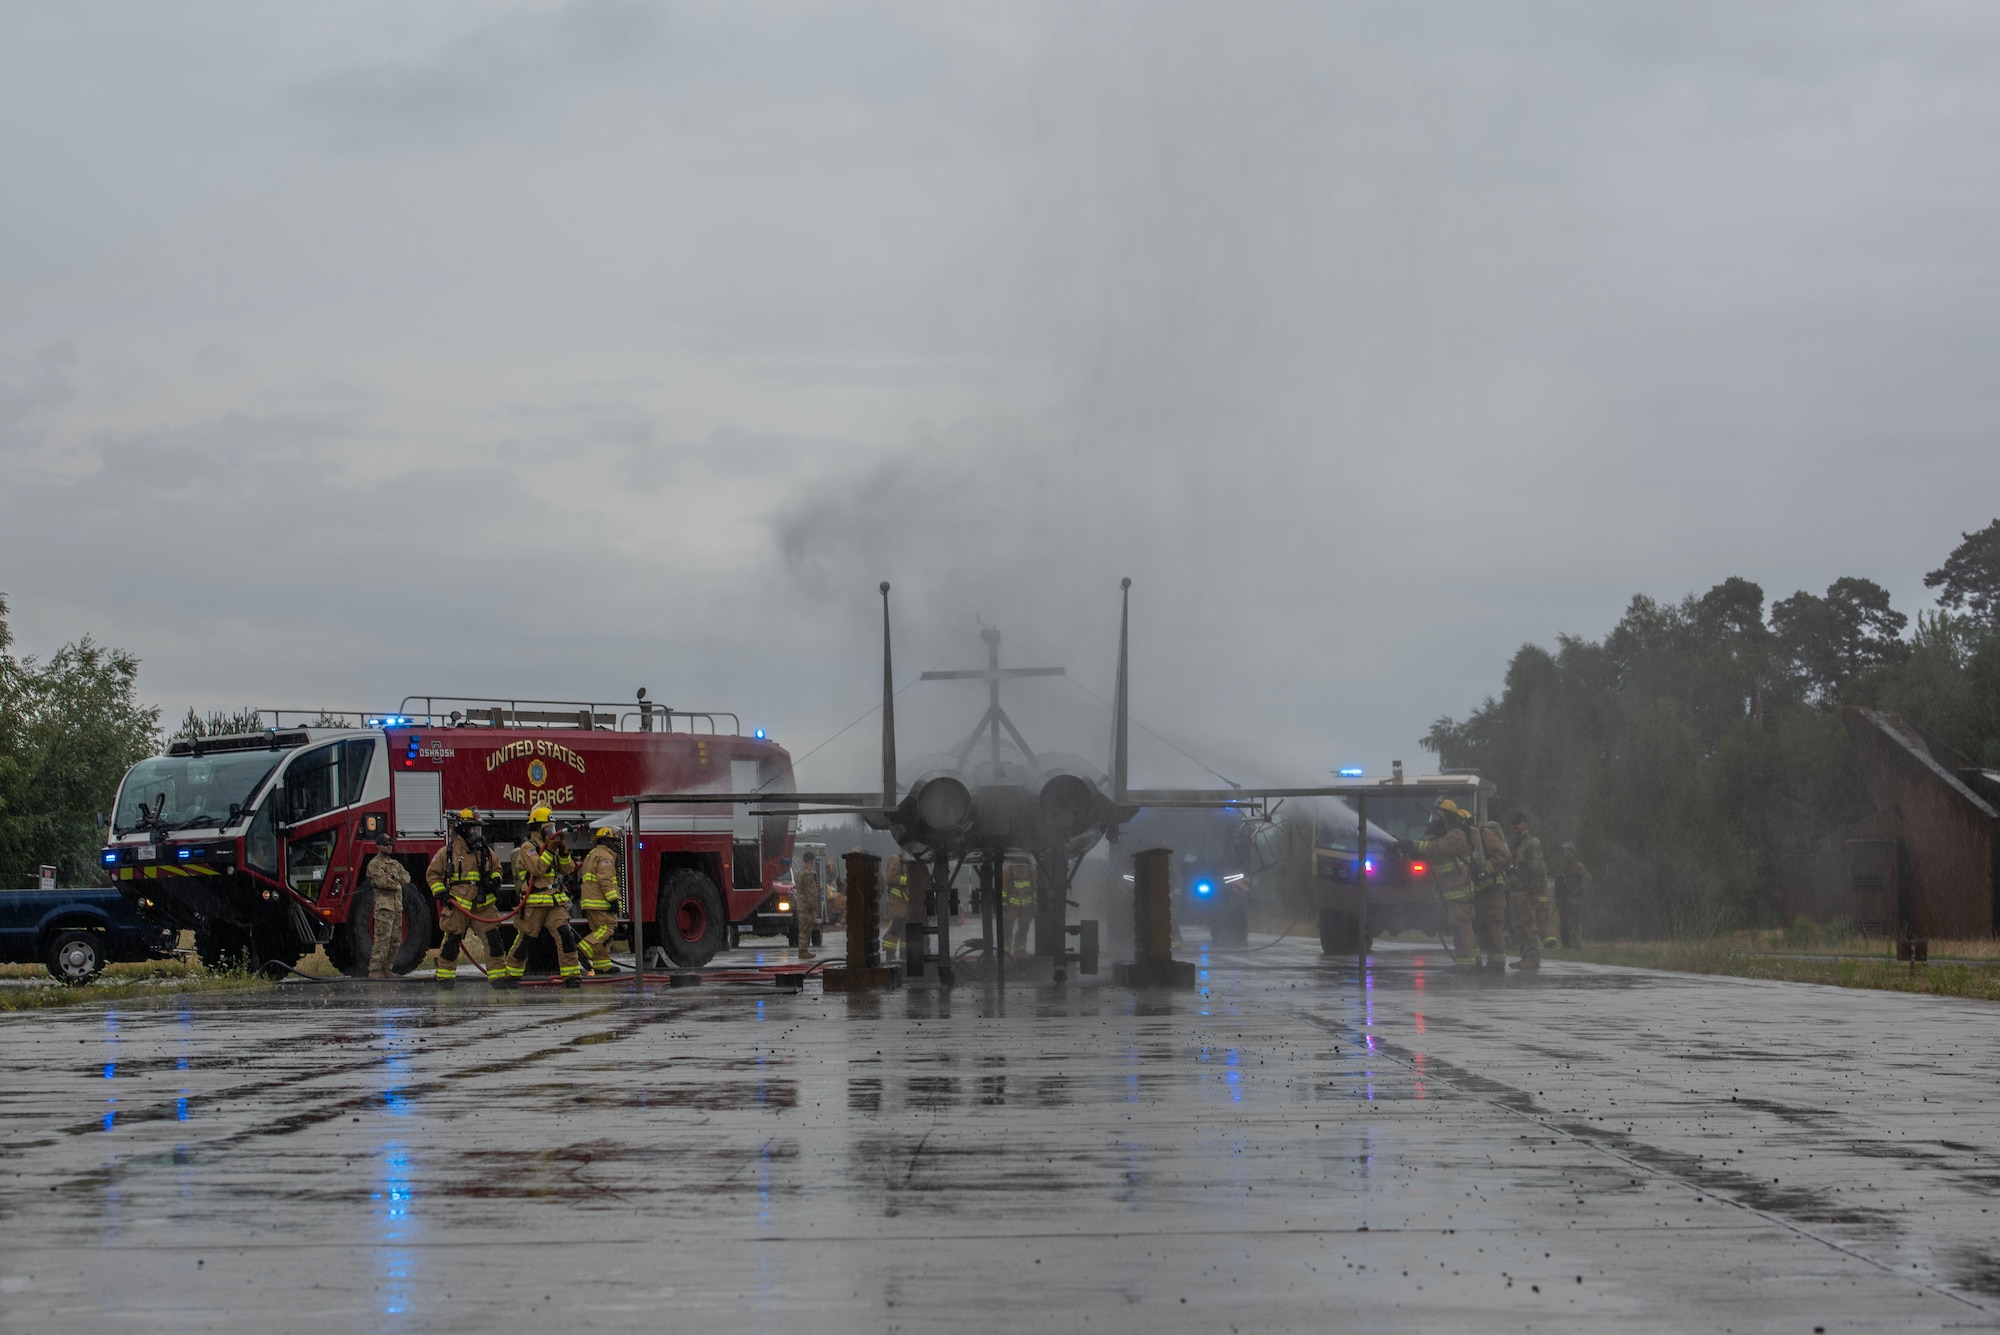 Firefighters use a hose to spray down an F-15 aircraft replica